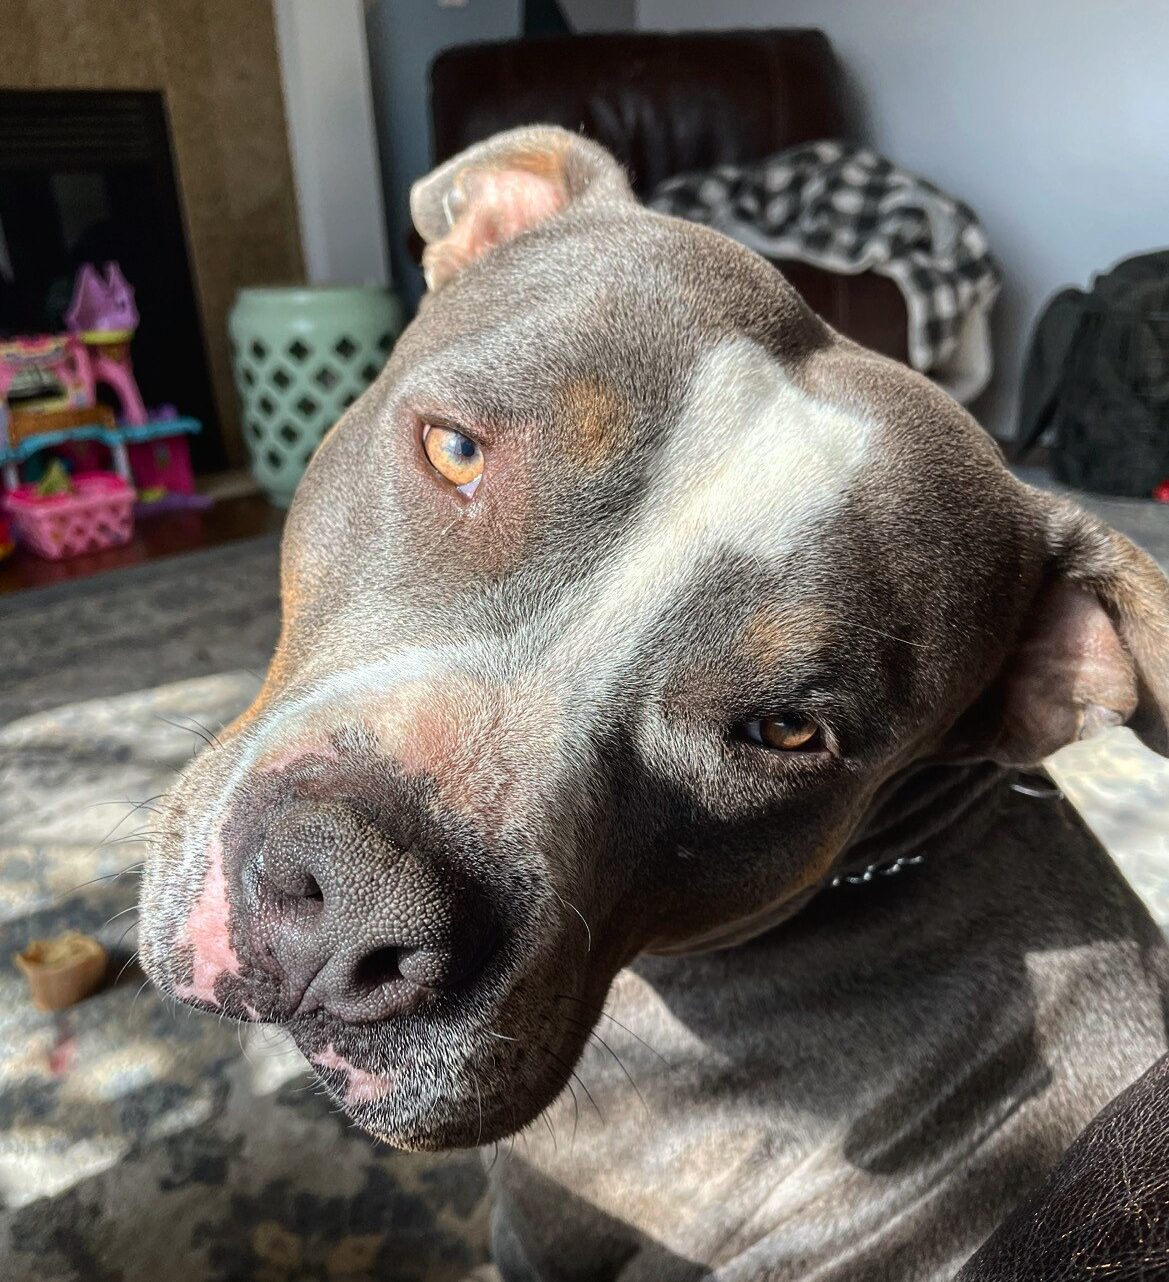 Closeup of a gray and white pitbull-type dog looking at the camera